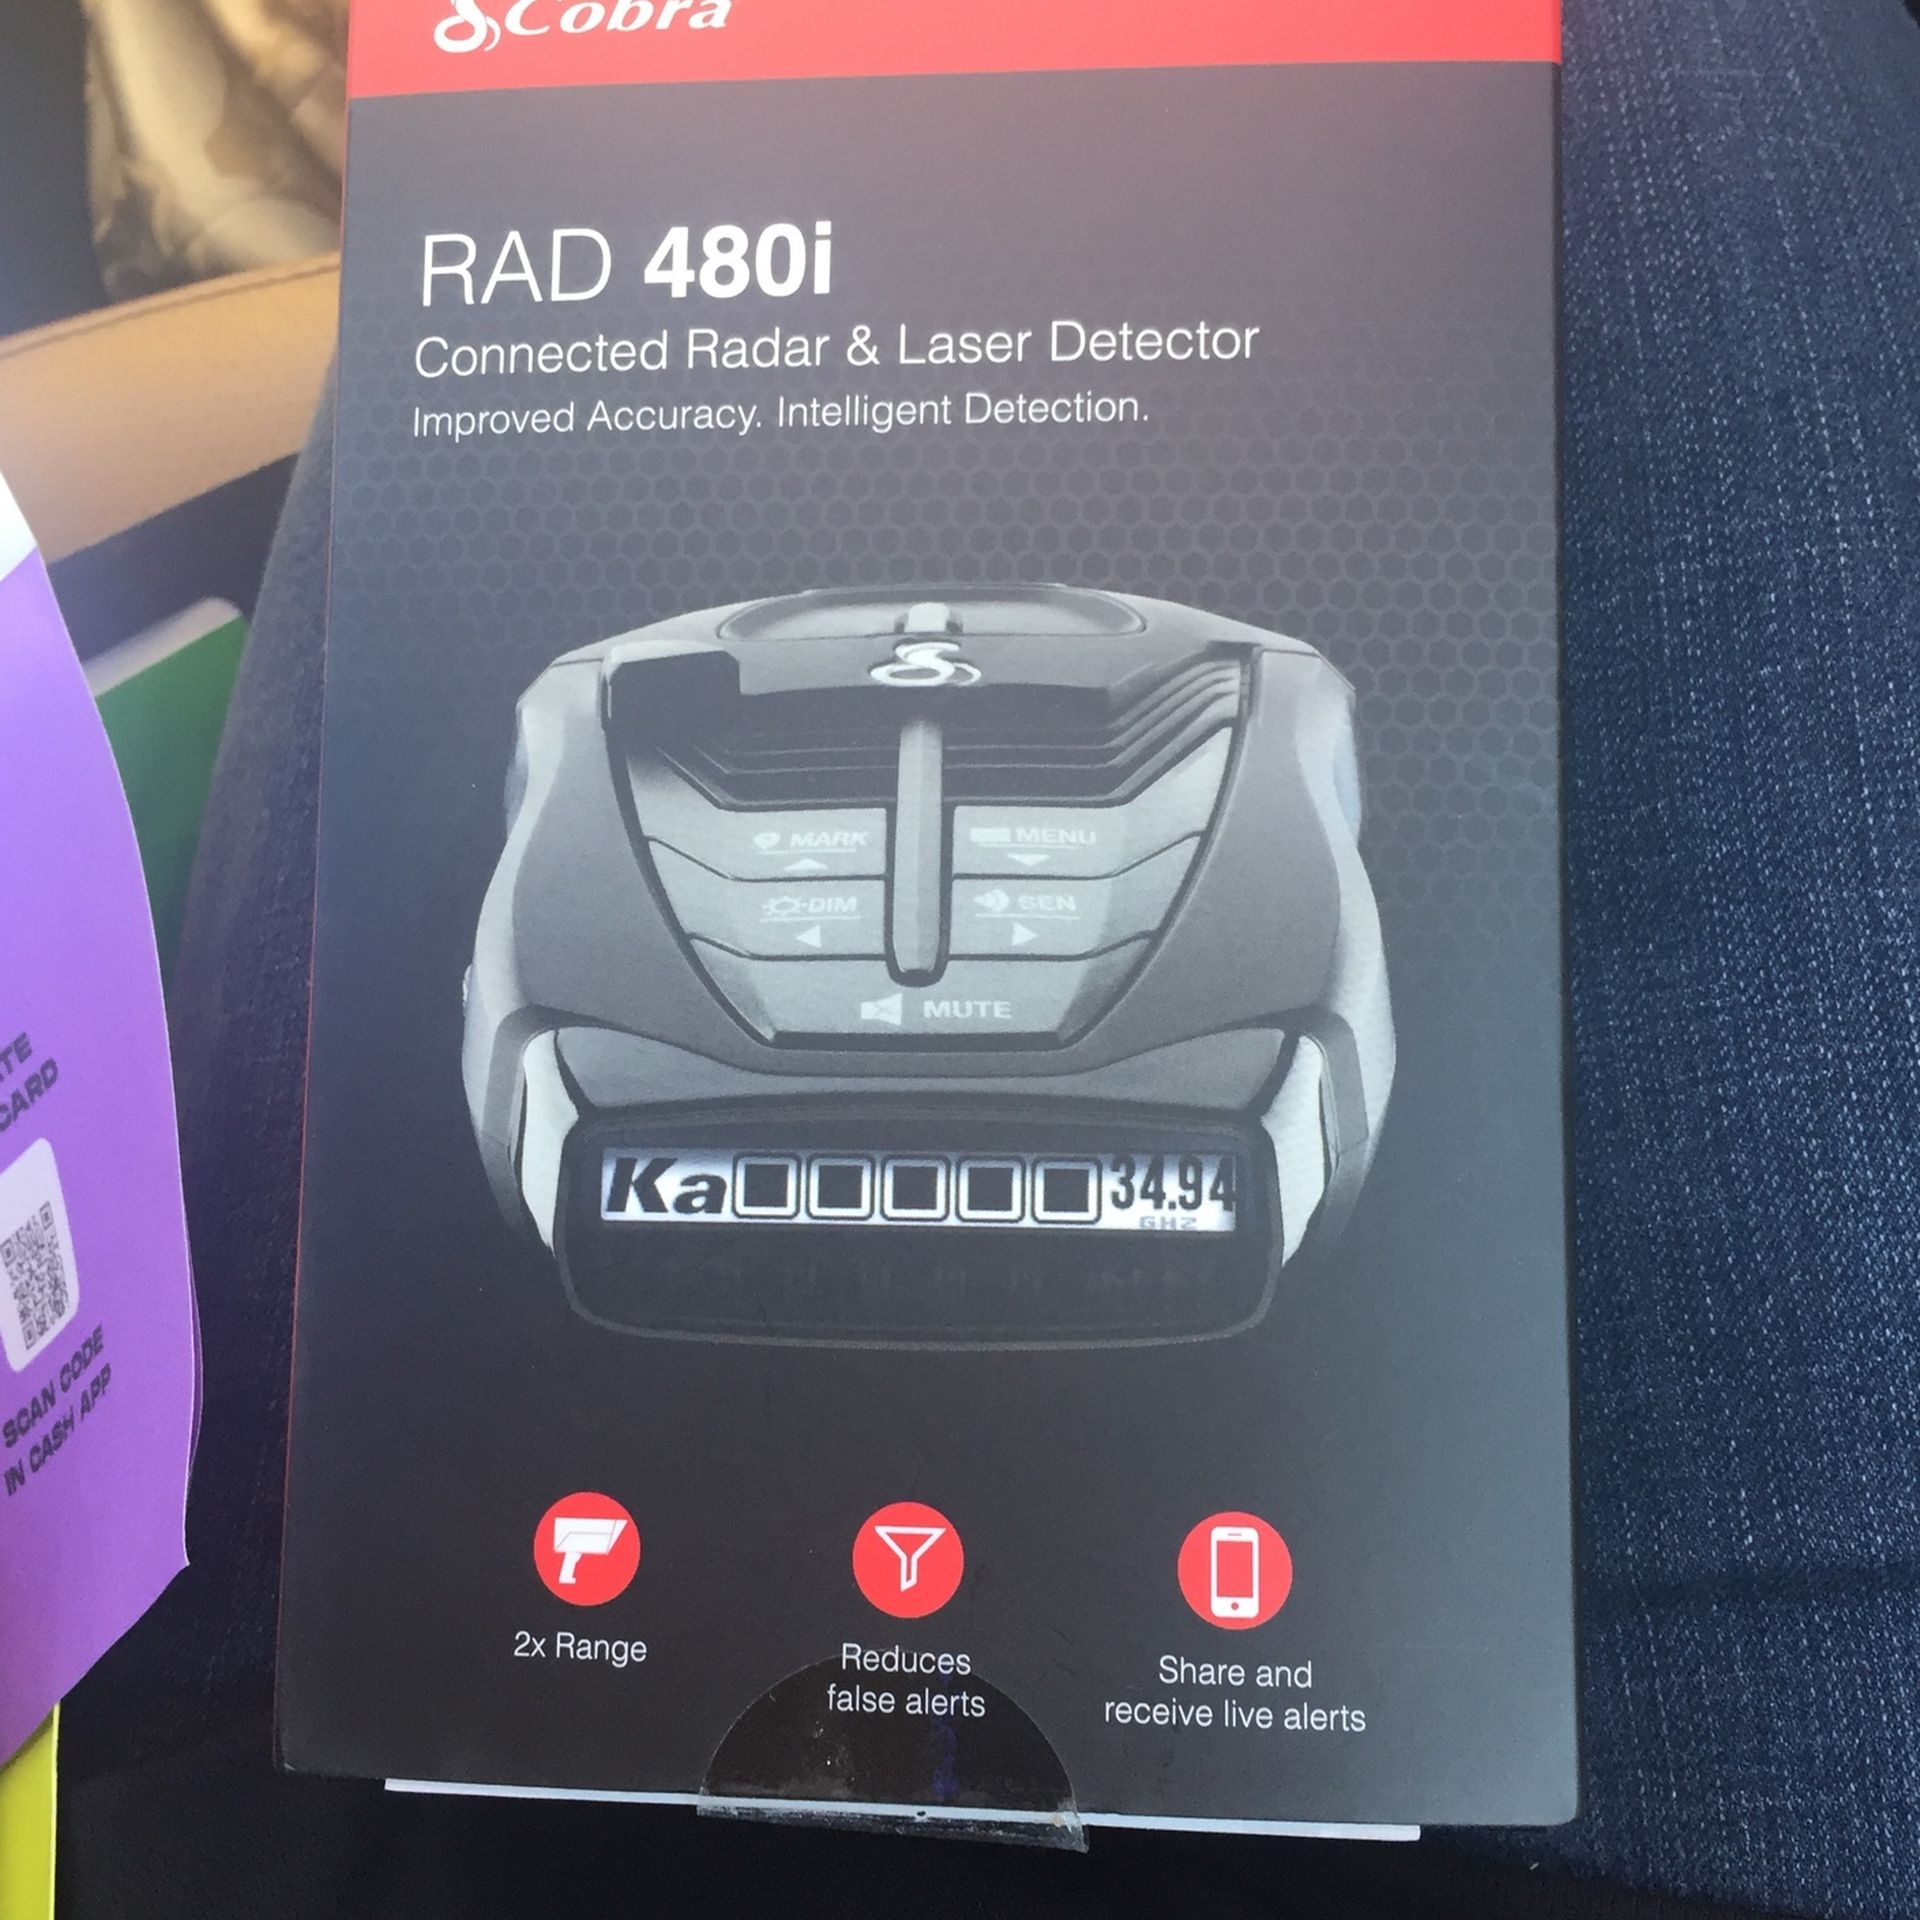 Connected Radar And Laser Detector